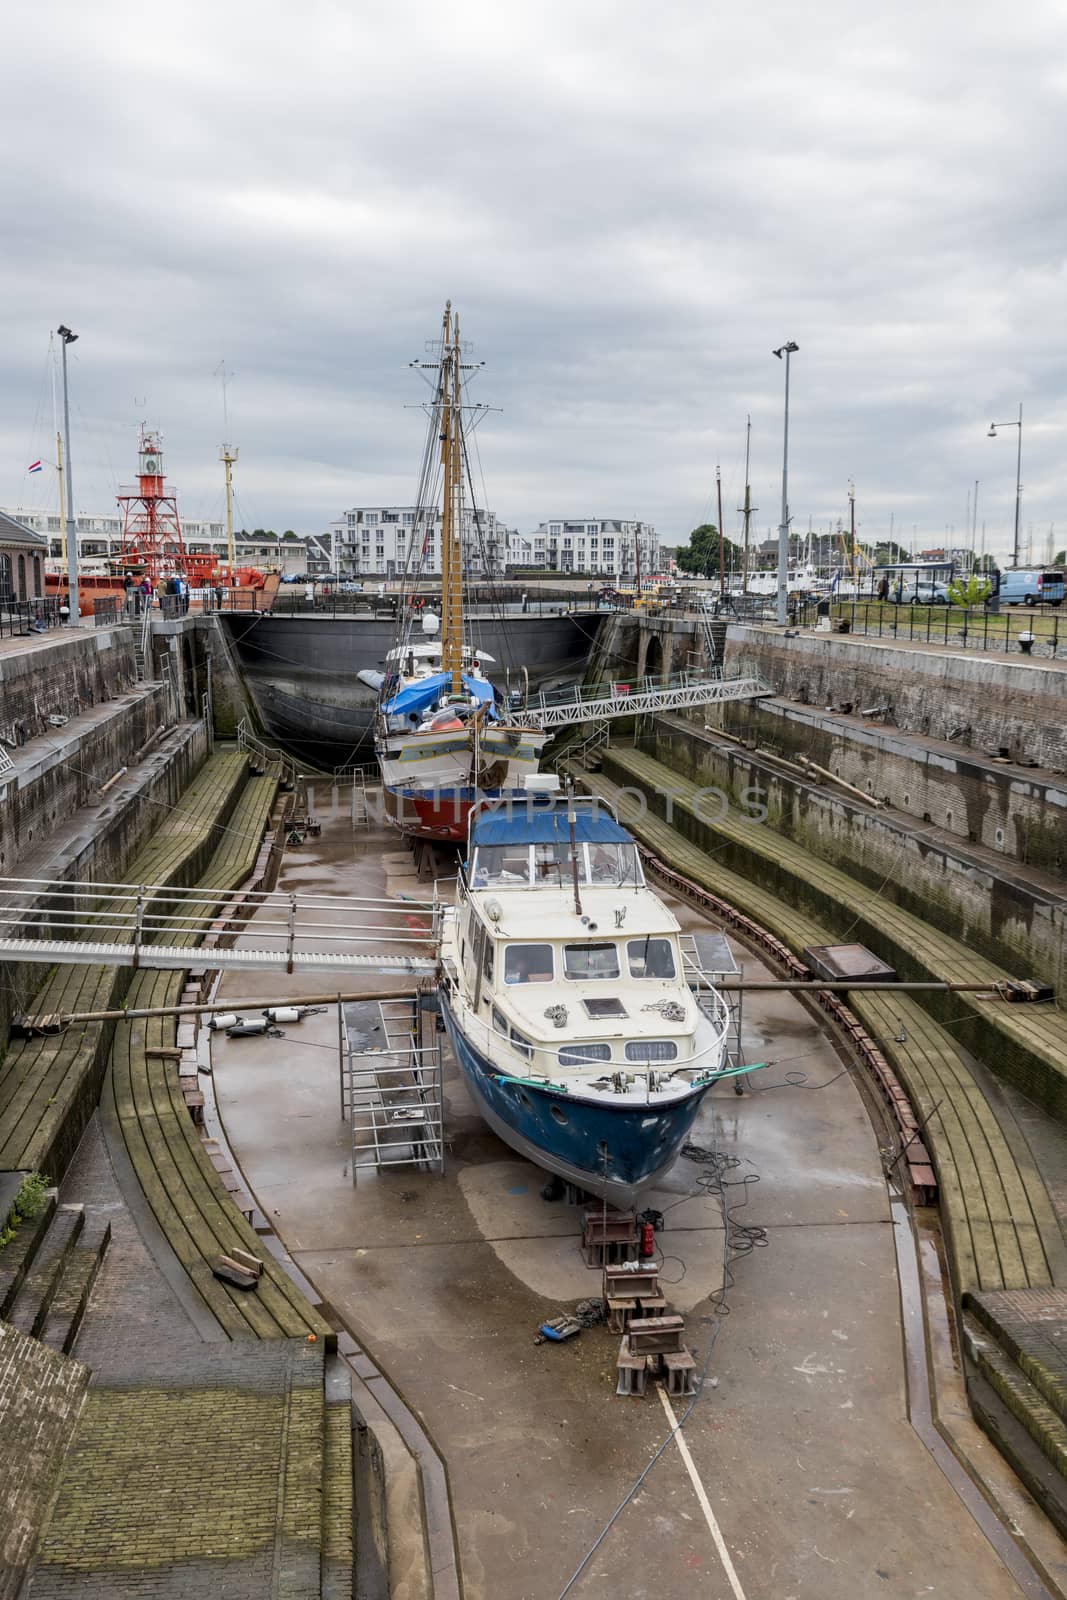 ship in the only working drydock in holland by compuinfoto